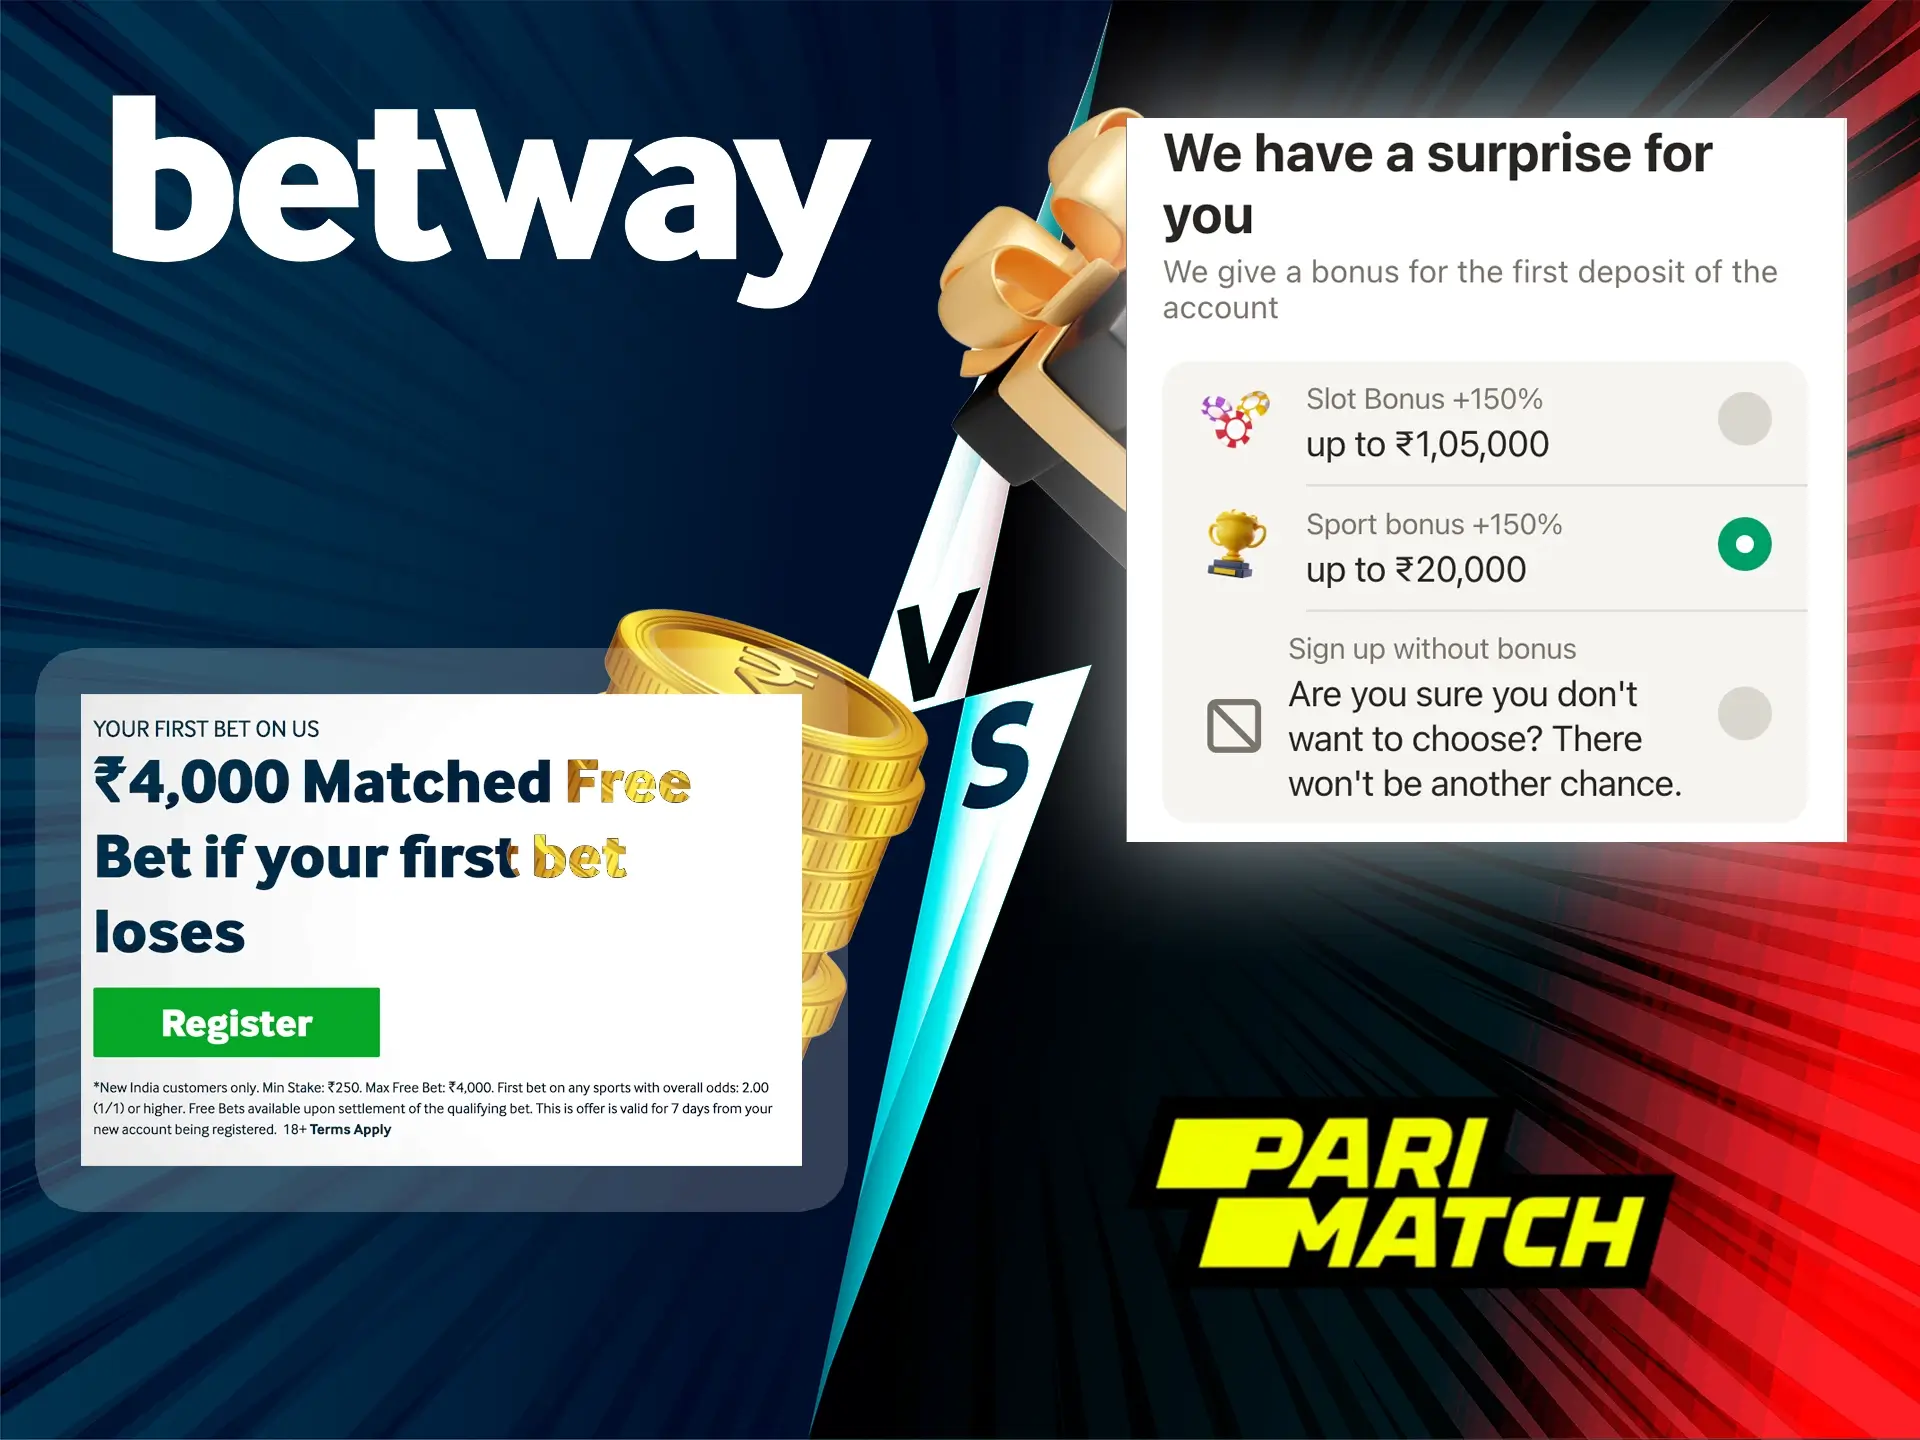 Take a look at the great bonuses from Betway and Parimatch.